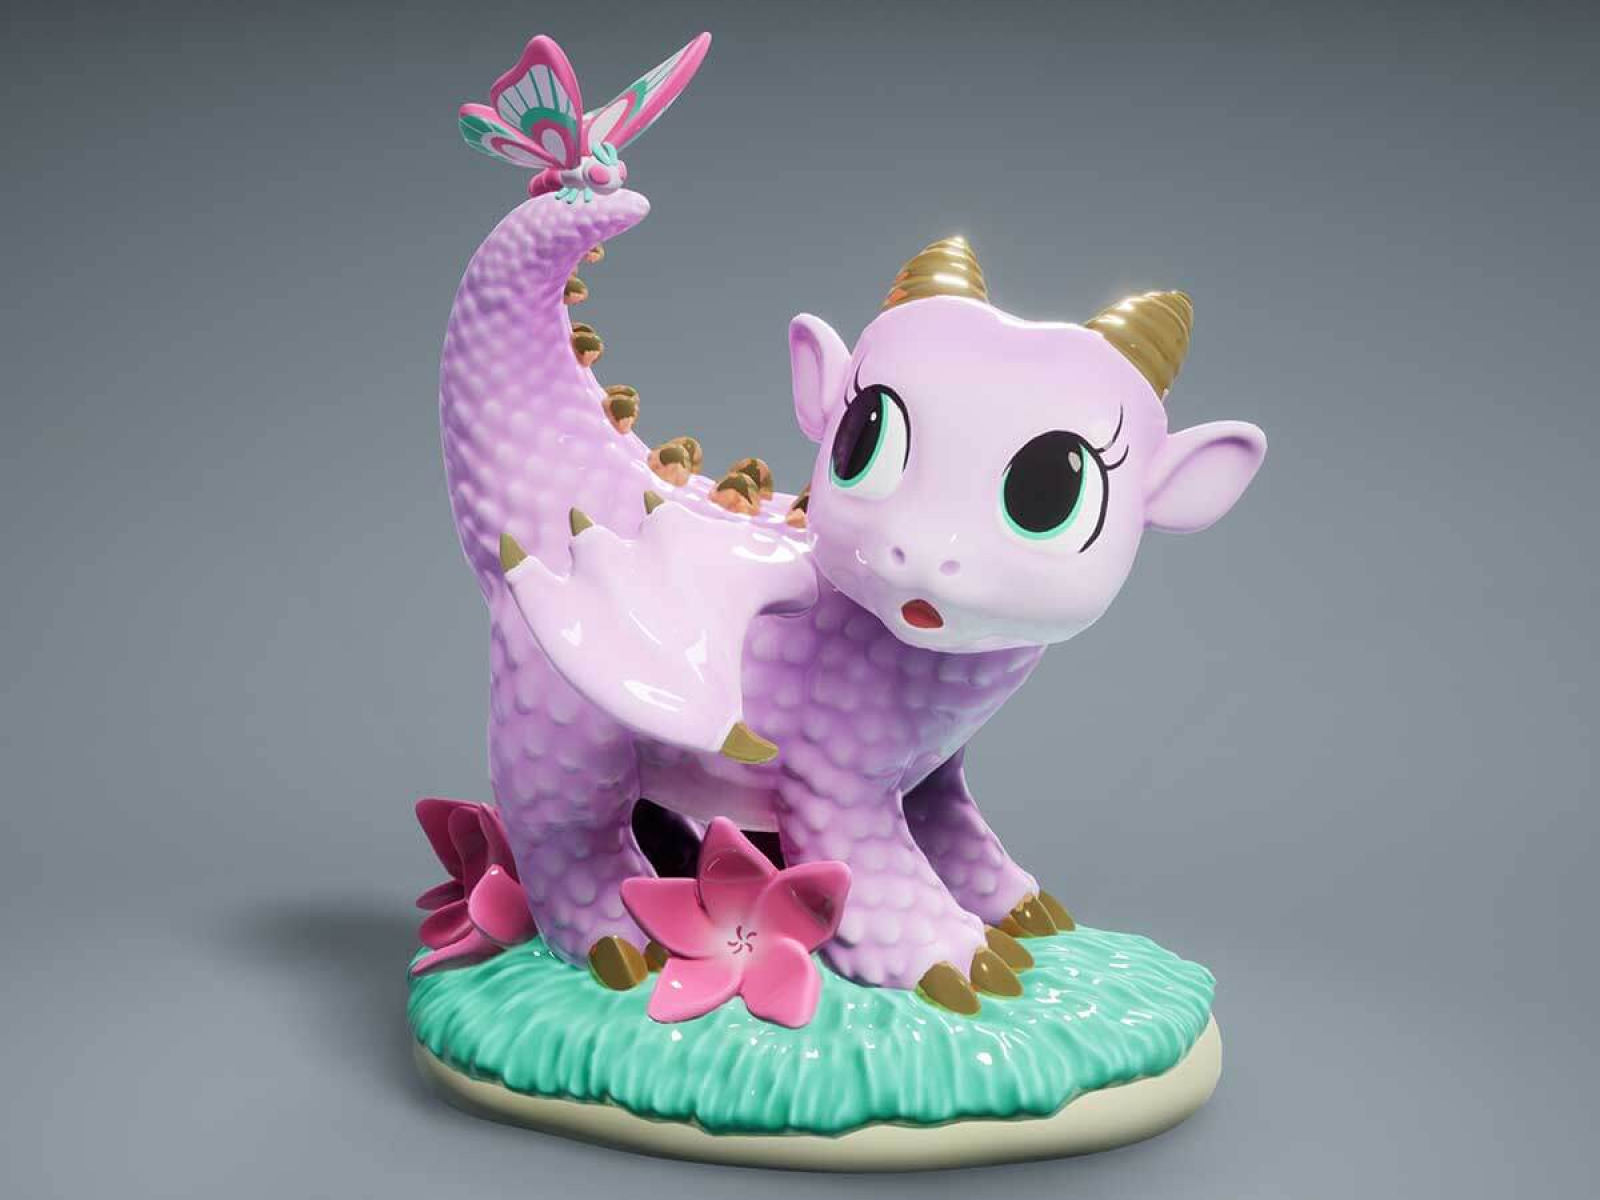 3D model of a young pink dragon with a butterfly on its tail